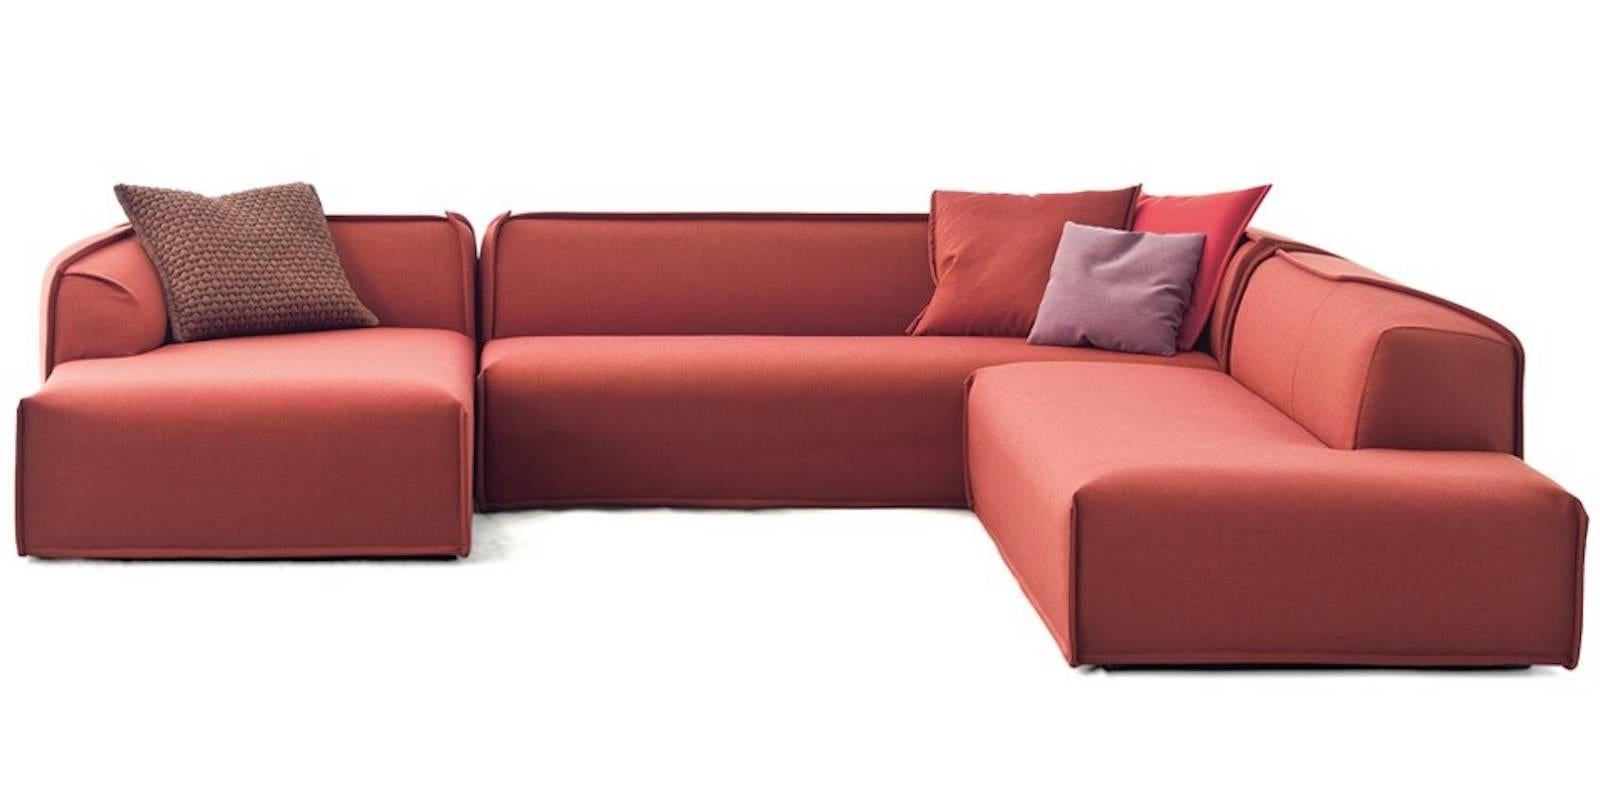 M.A.S.S.A.S Modular Sofa by Patricia Urquiola for Moroso in Fabric (Italienisch) im Angebot